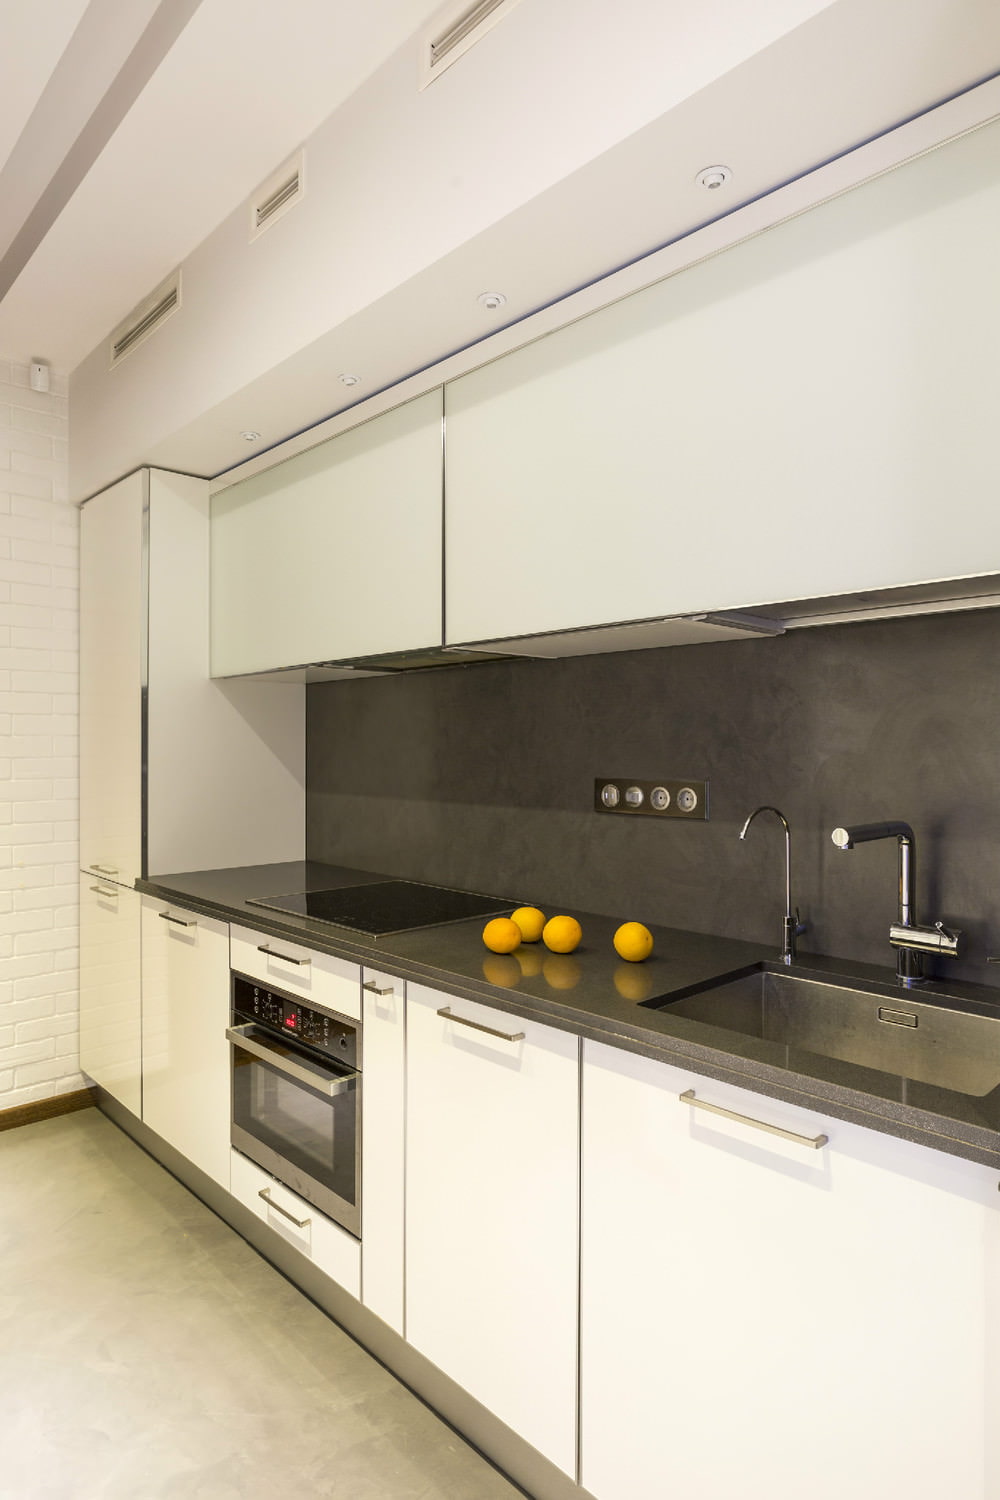 Kitchen in the design of a two-room apartment of 43 sq. m.